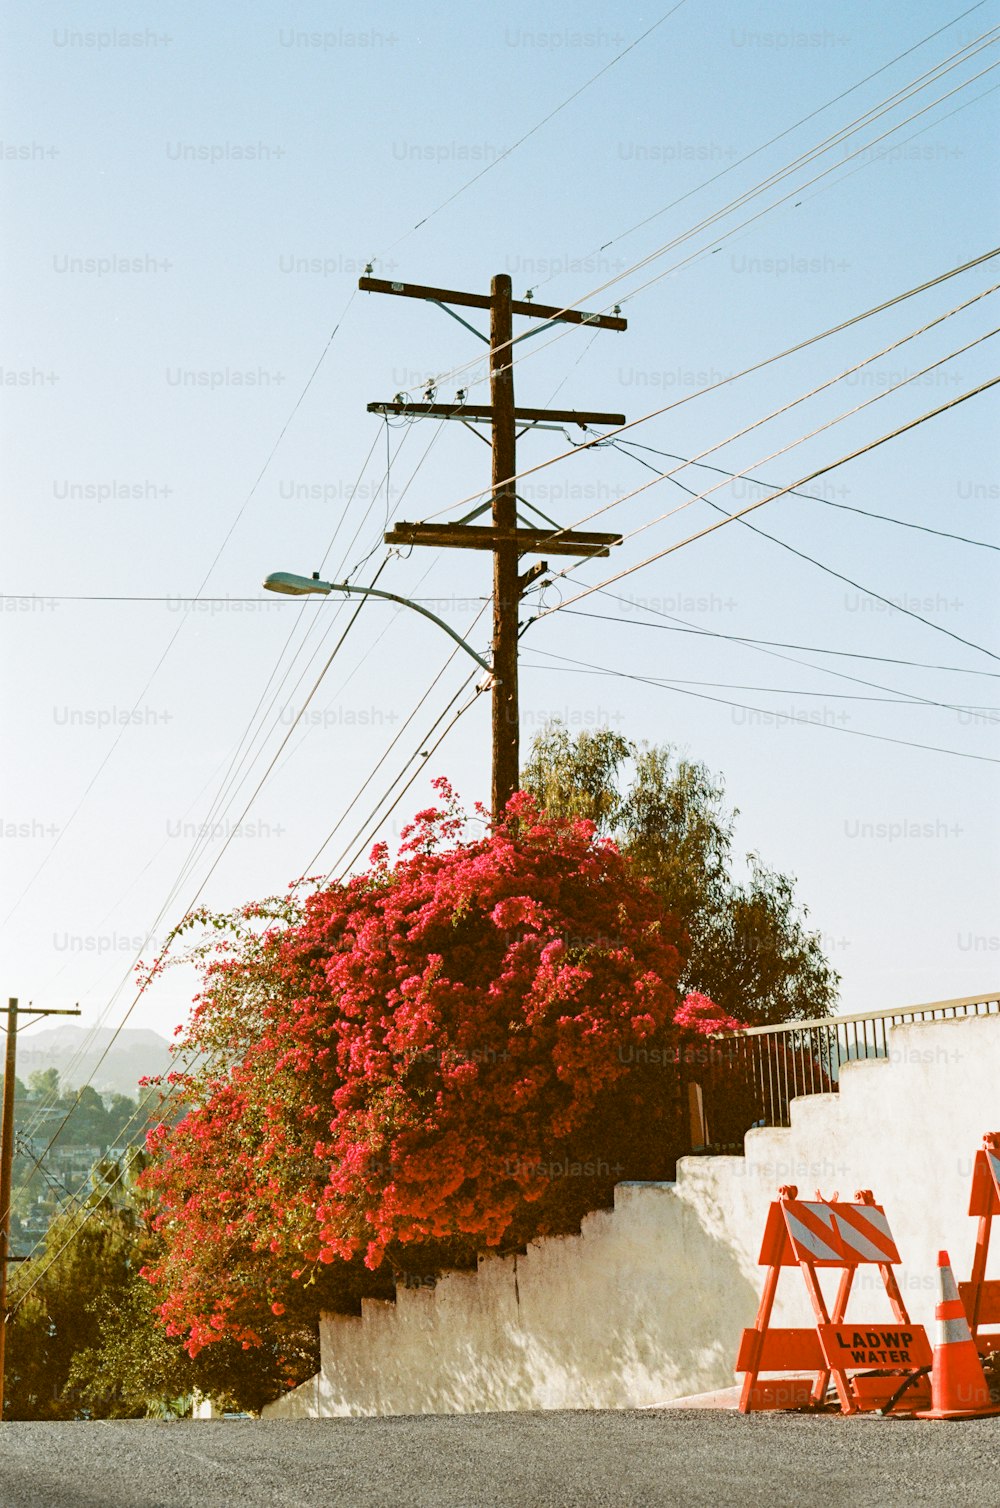 a couple of red chairs sitting under power lines